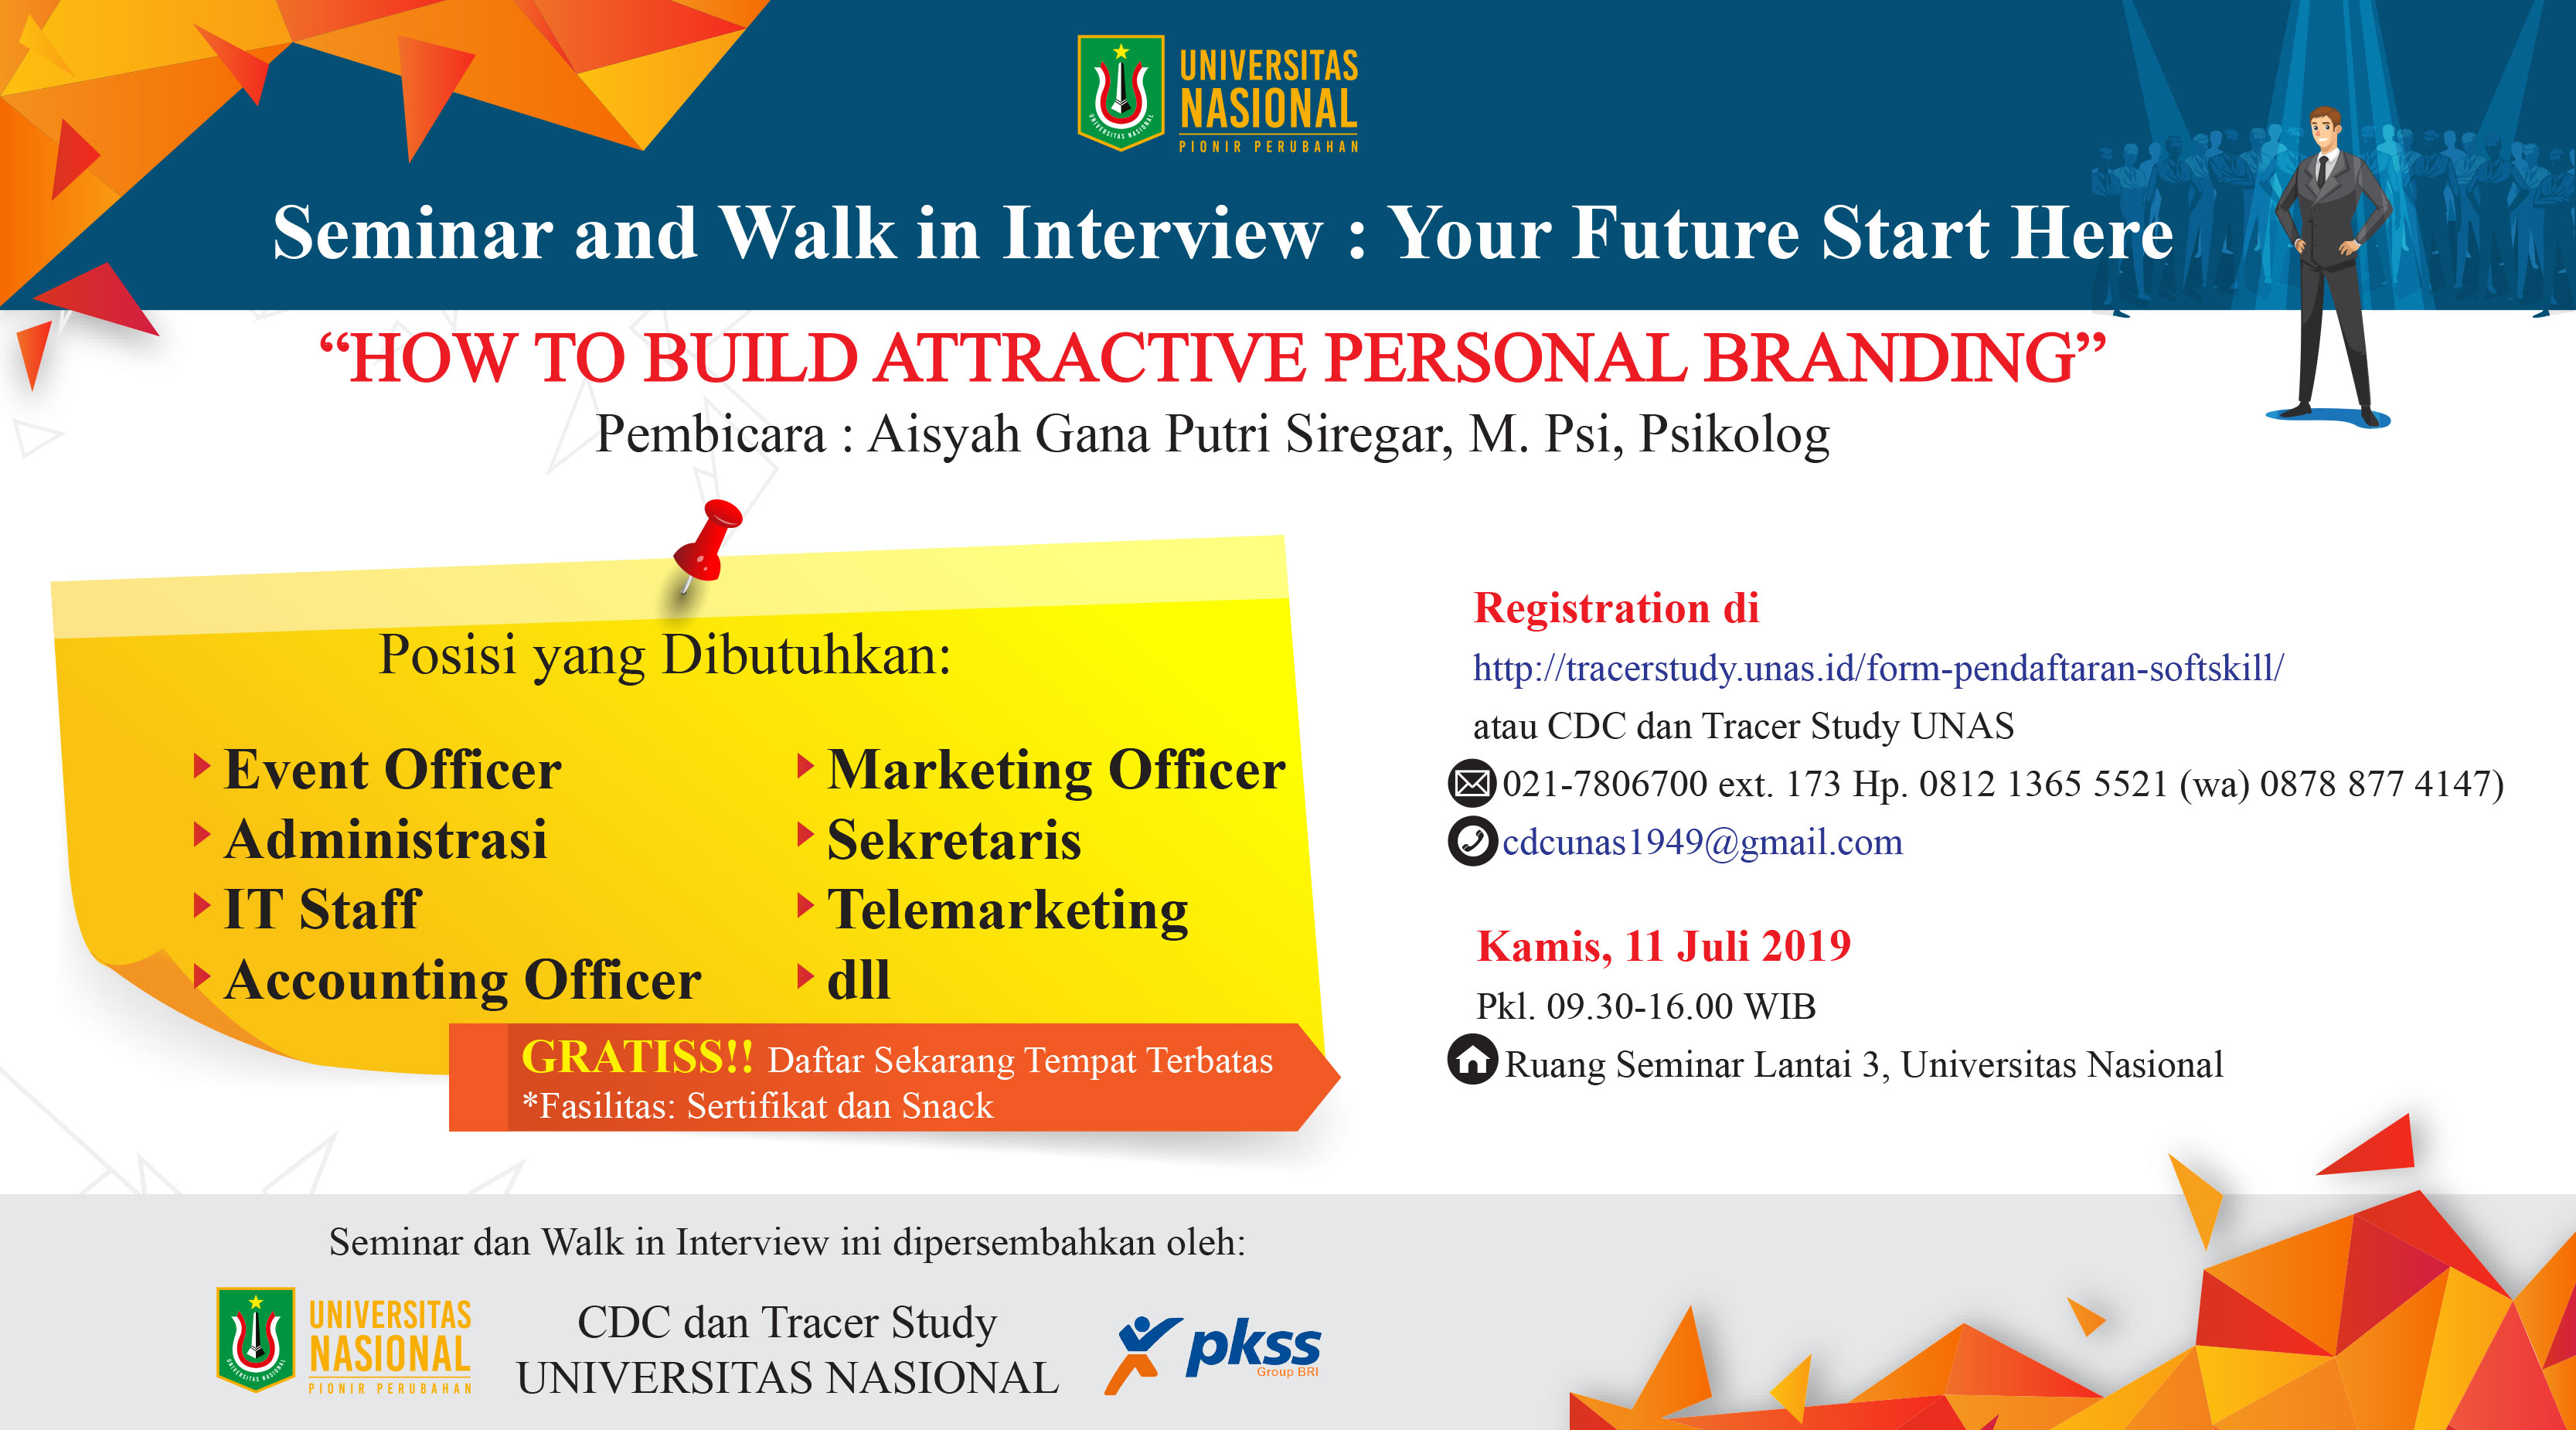 Seminar and Walk in Interview : Your Future Start Here